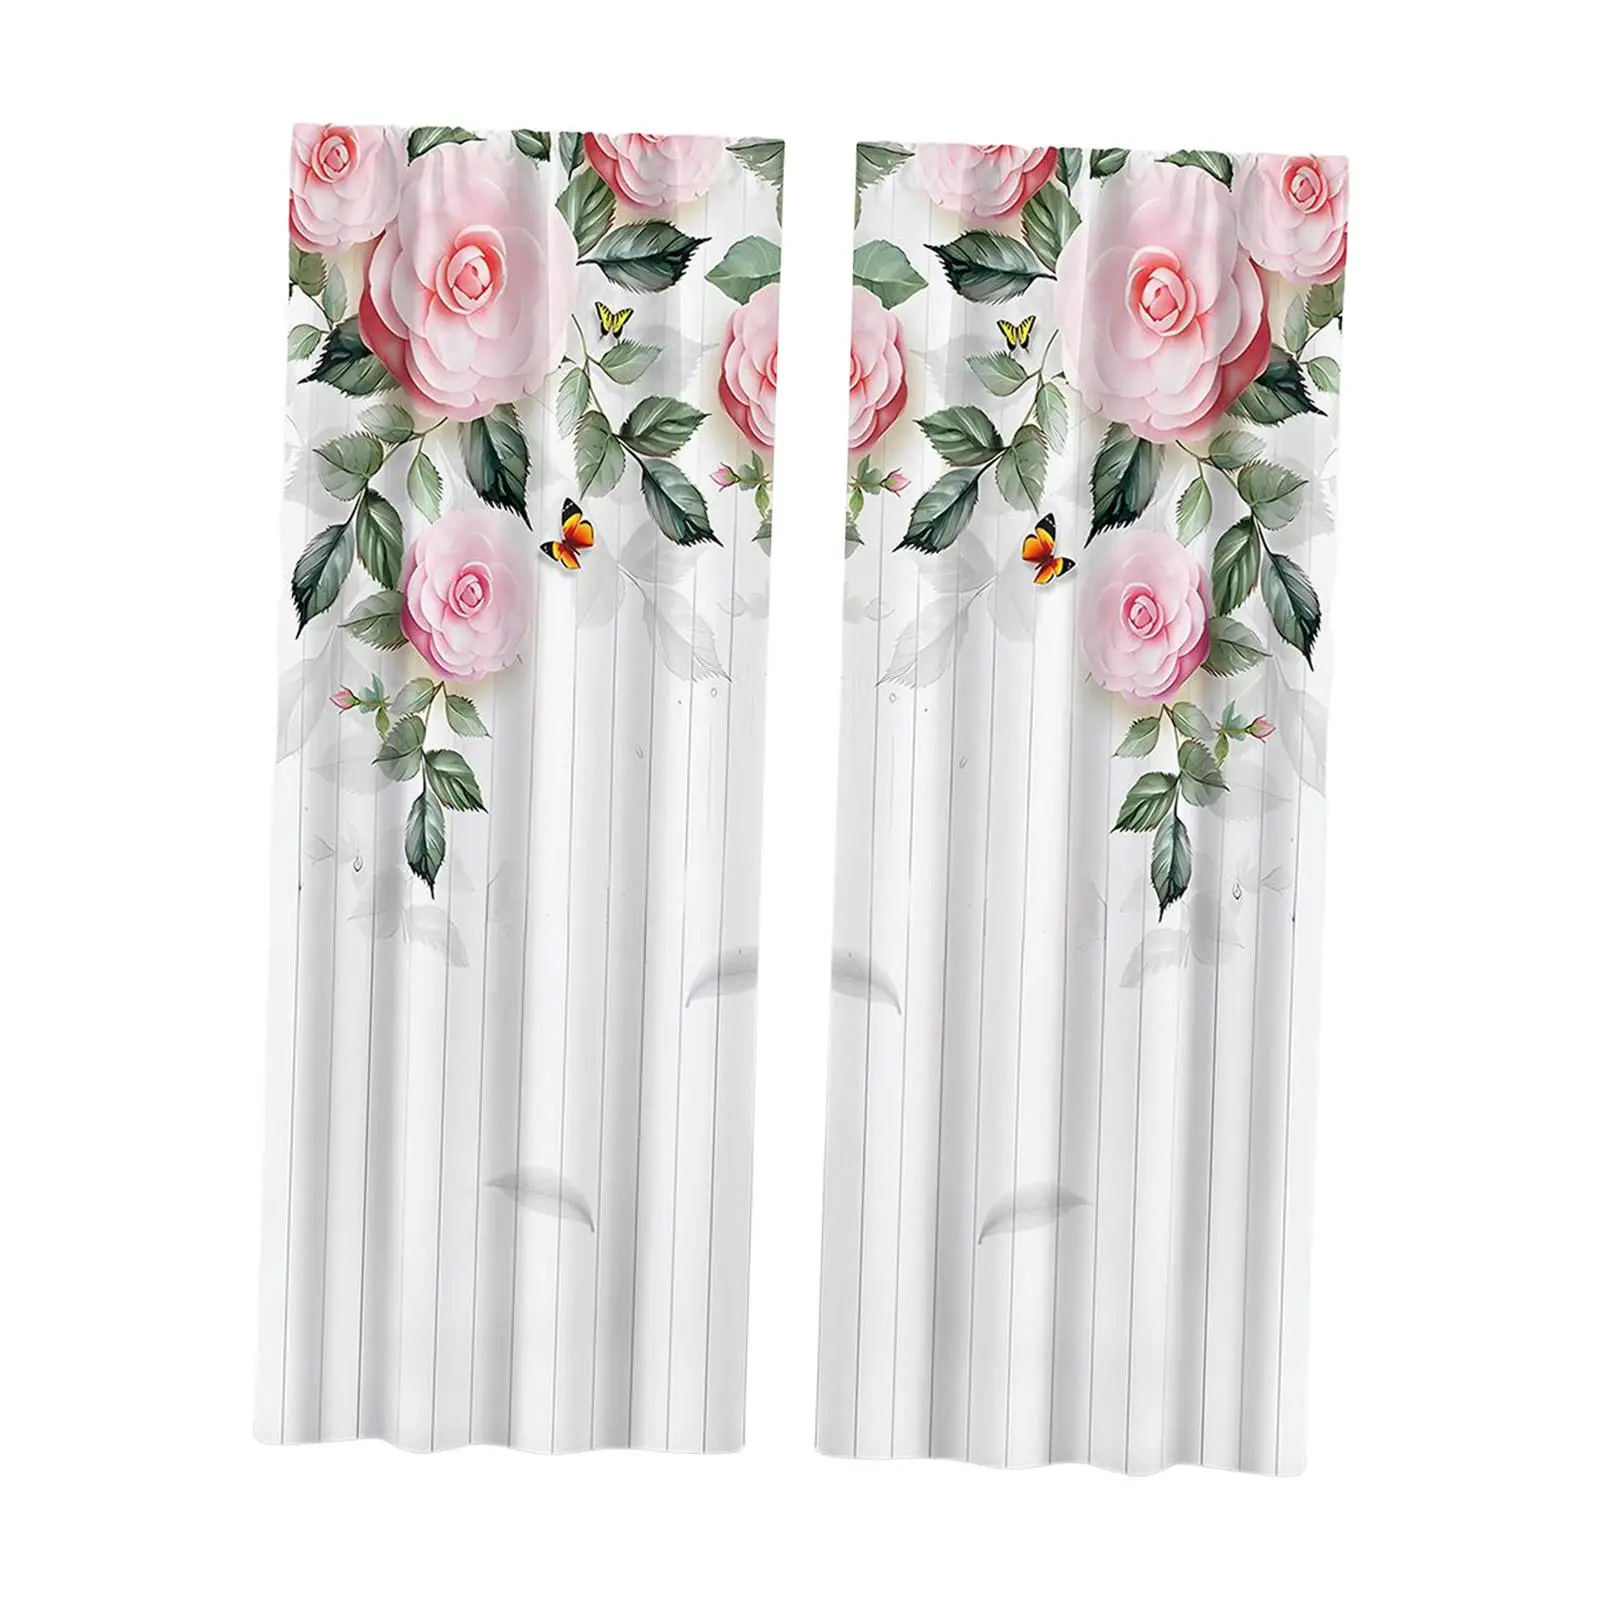 Rose Floral Digital Printing Sheer Curtain with Grommets Machine Washable